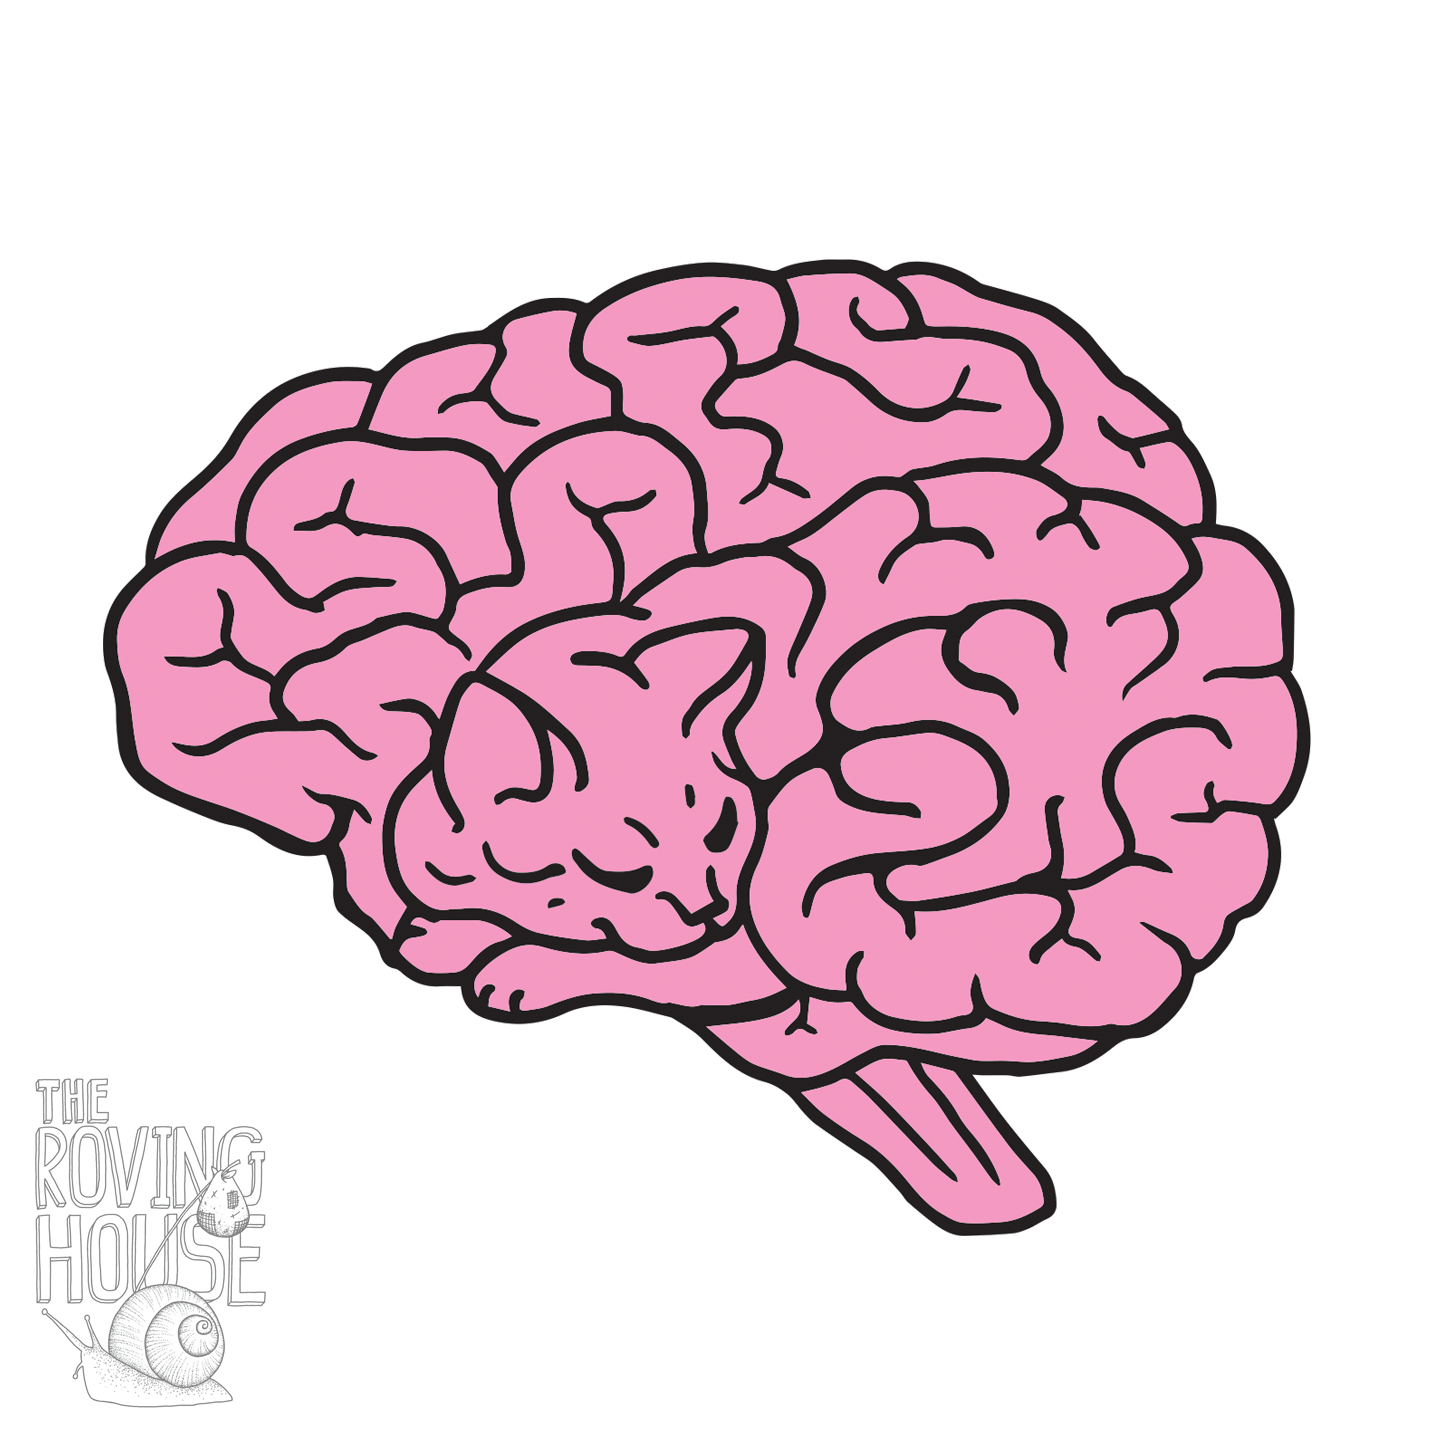 A hot pink and black matte vinyl sticker in the shape of a human brain. Upon closer inspection, the lines of the brain resemble a sleeping cat.